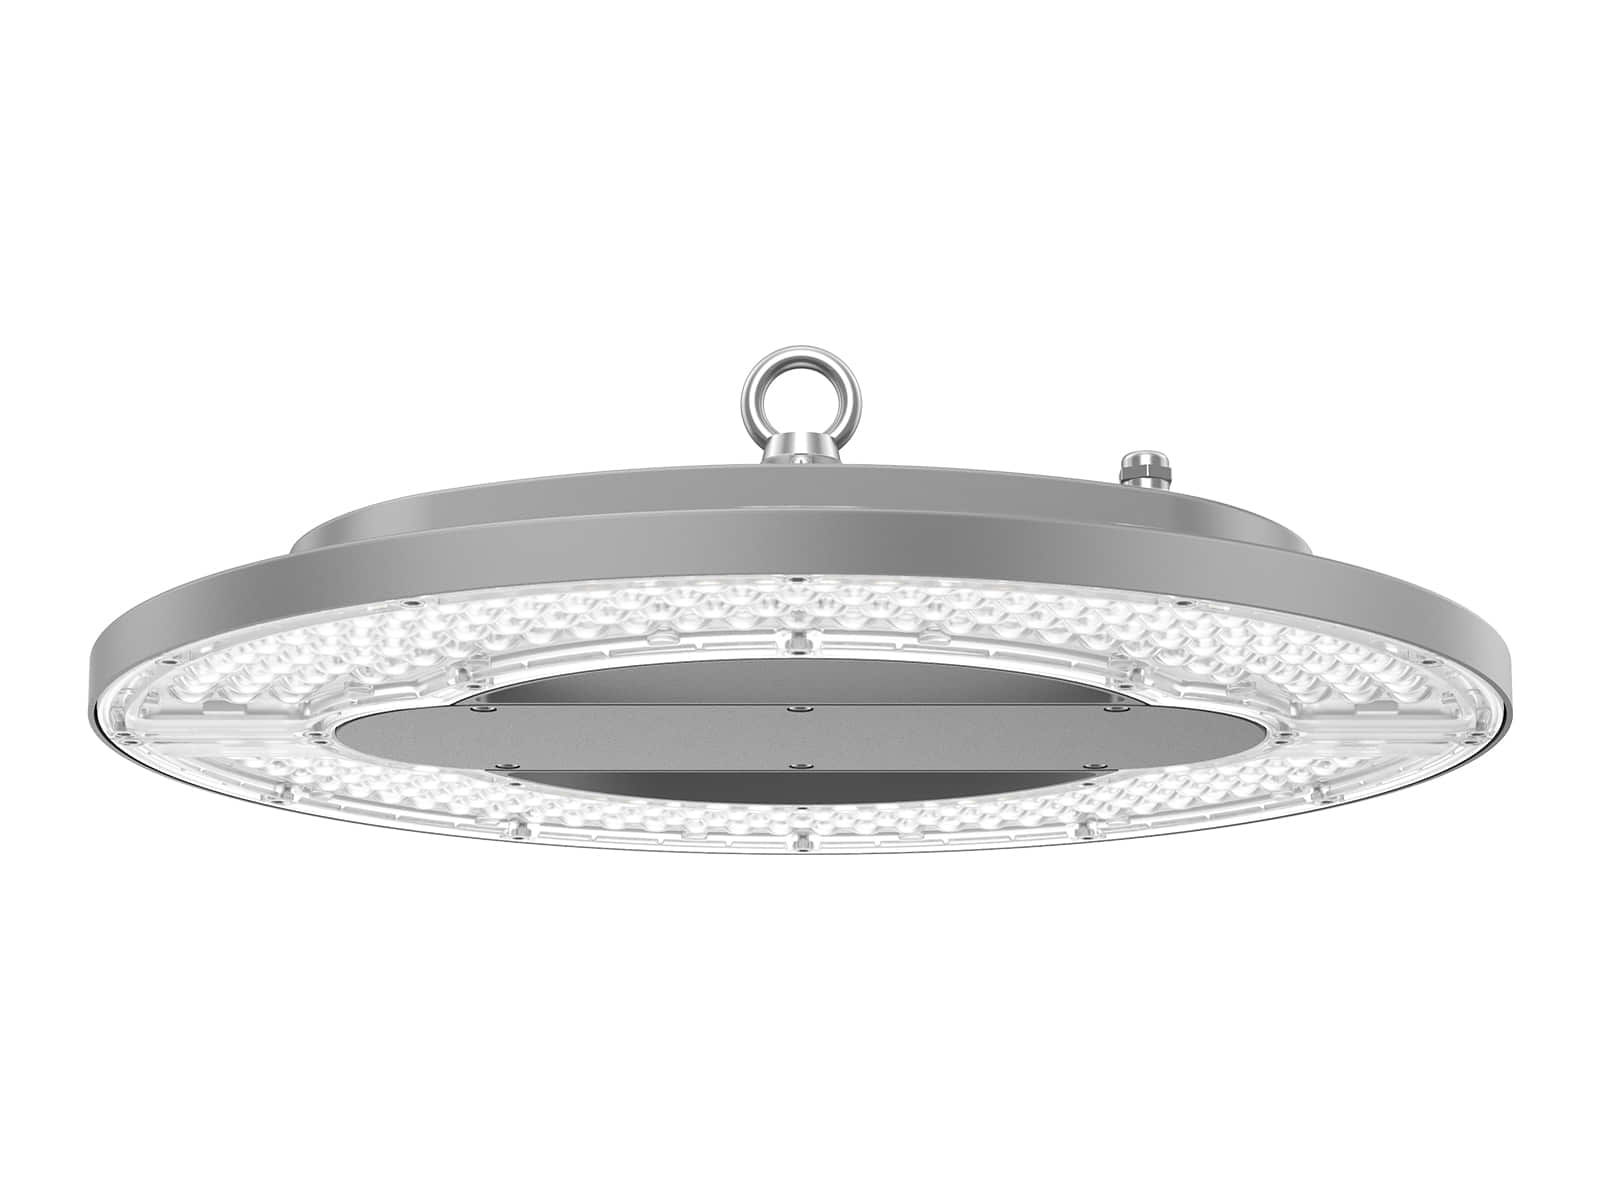 HB62 High Bay Light Up to 200lm/W